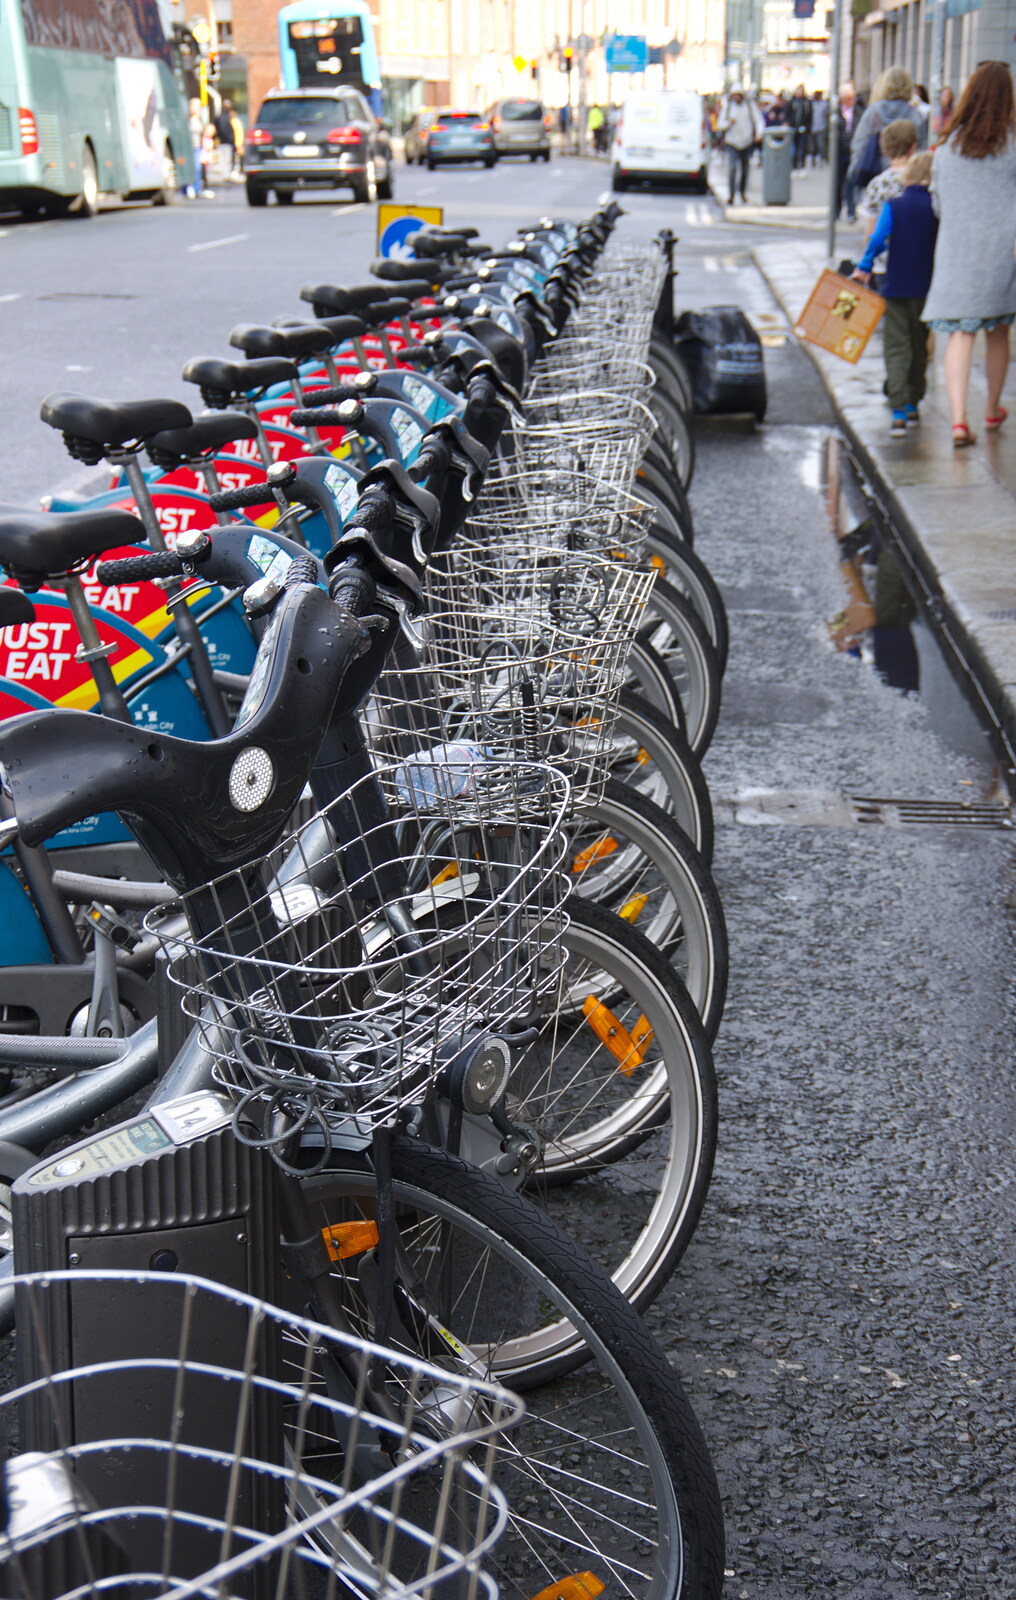 A row of Boris bikes from Busking in Temple Bar, Dublin, Ireland - 12th August 2019